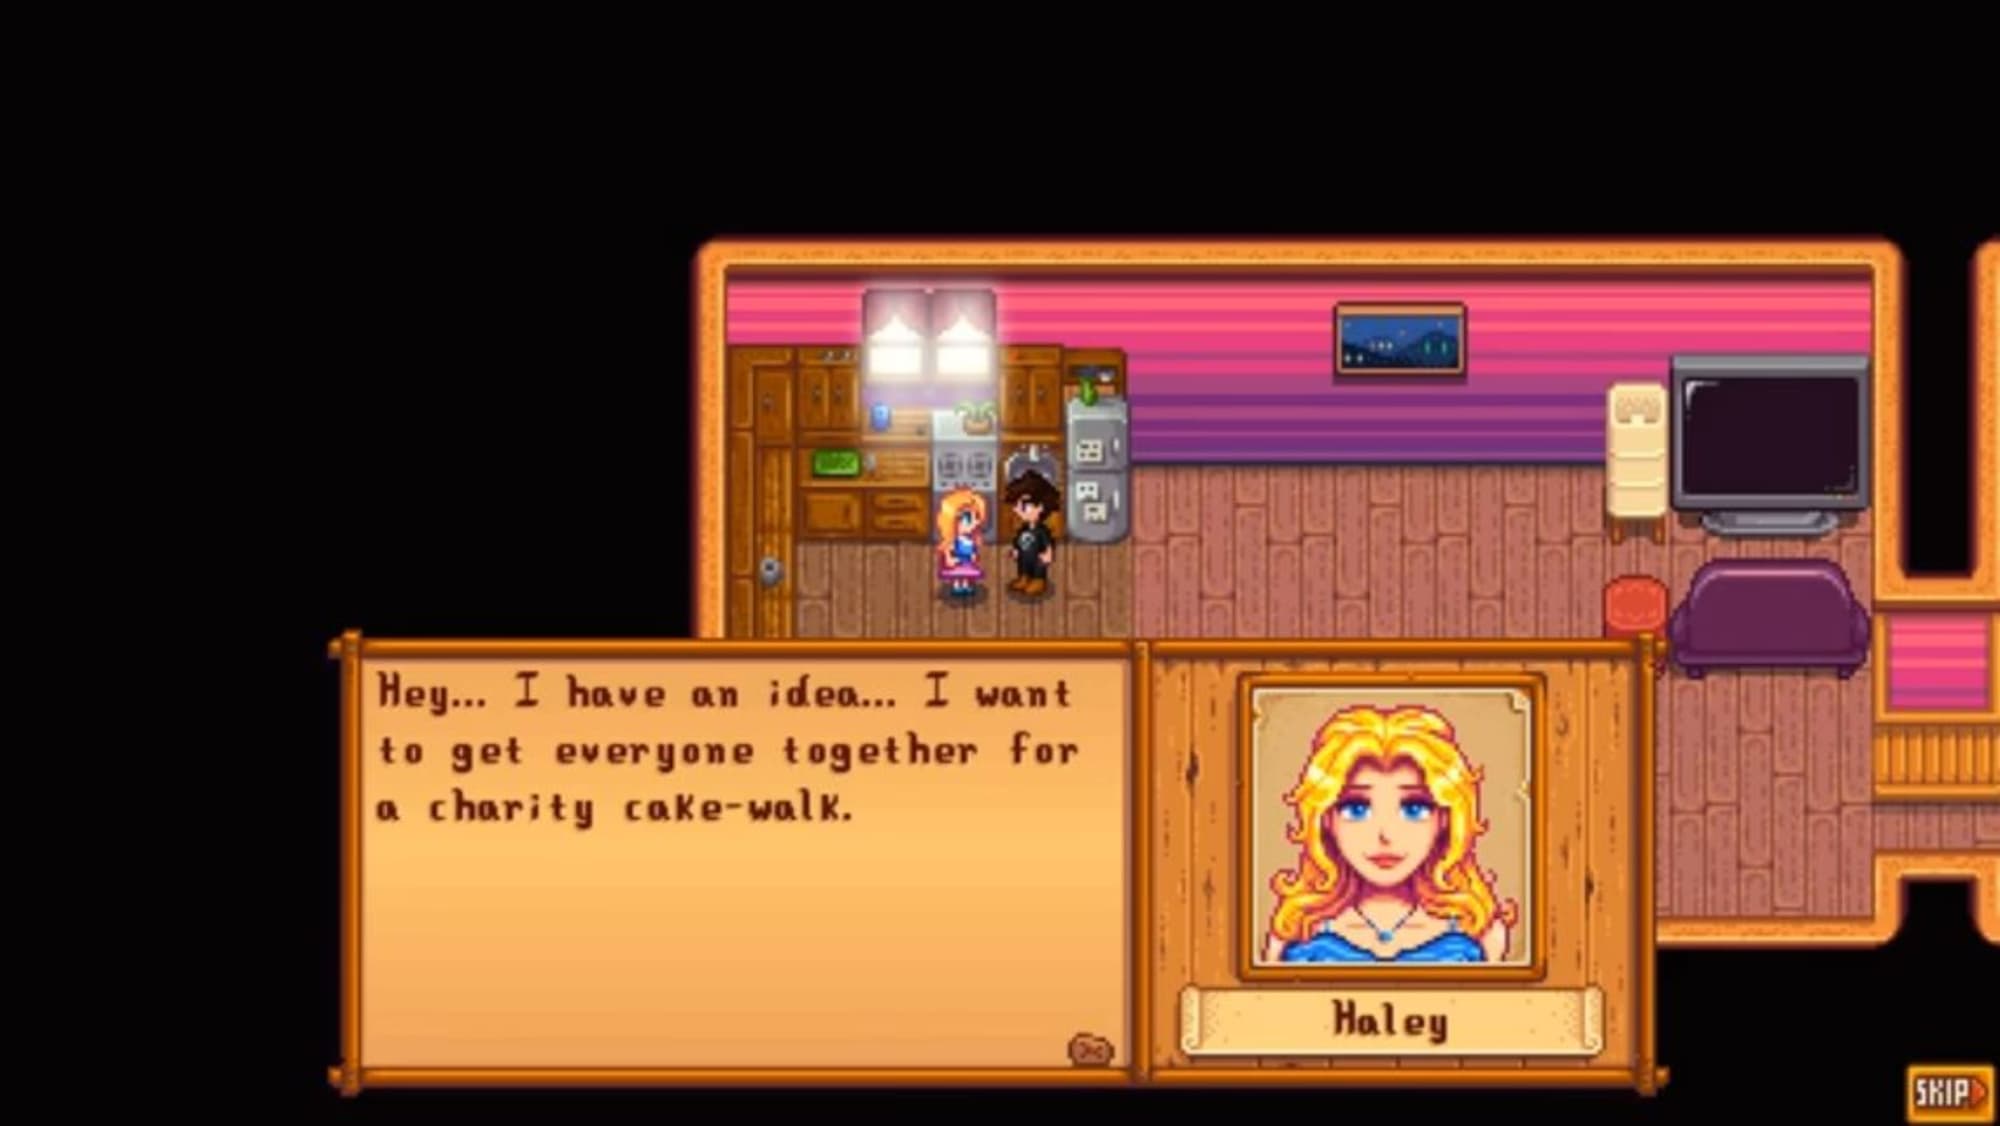 Stardew Valley 1 4 Update 14 Heart Event Walkthrough For Every Spouse Page 3